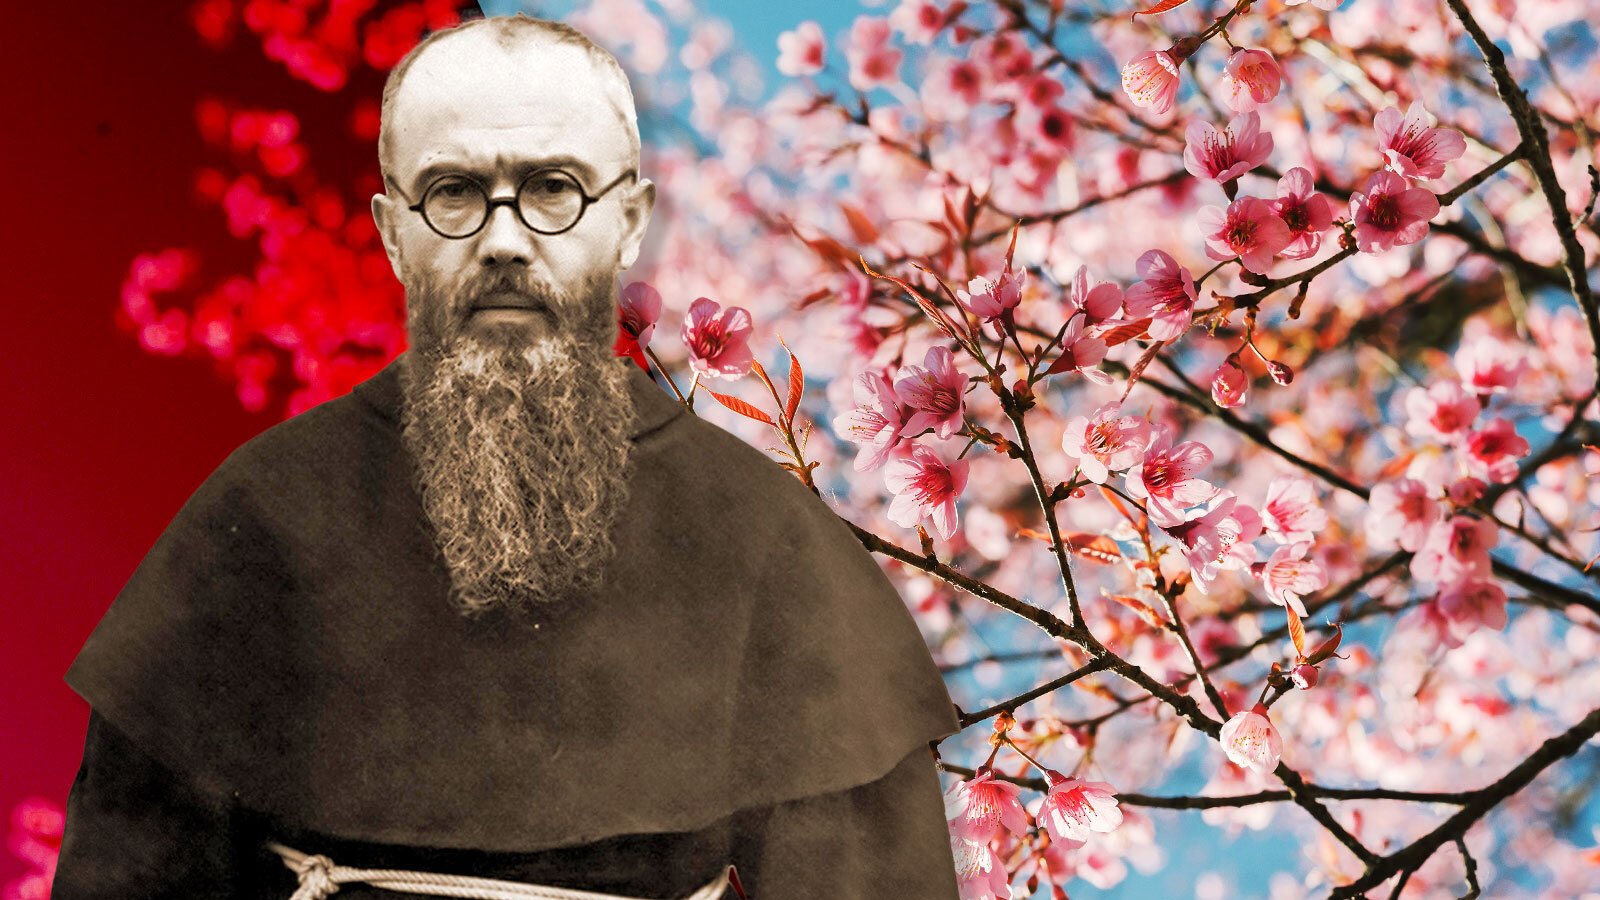 St Maximilian Kolbe voluntarily took the place of a fellow Polish prisoner condemned to die in Auschwitz